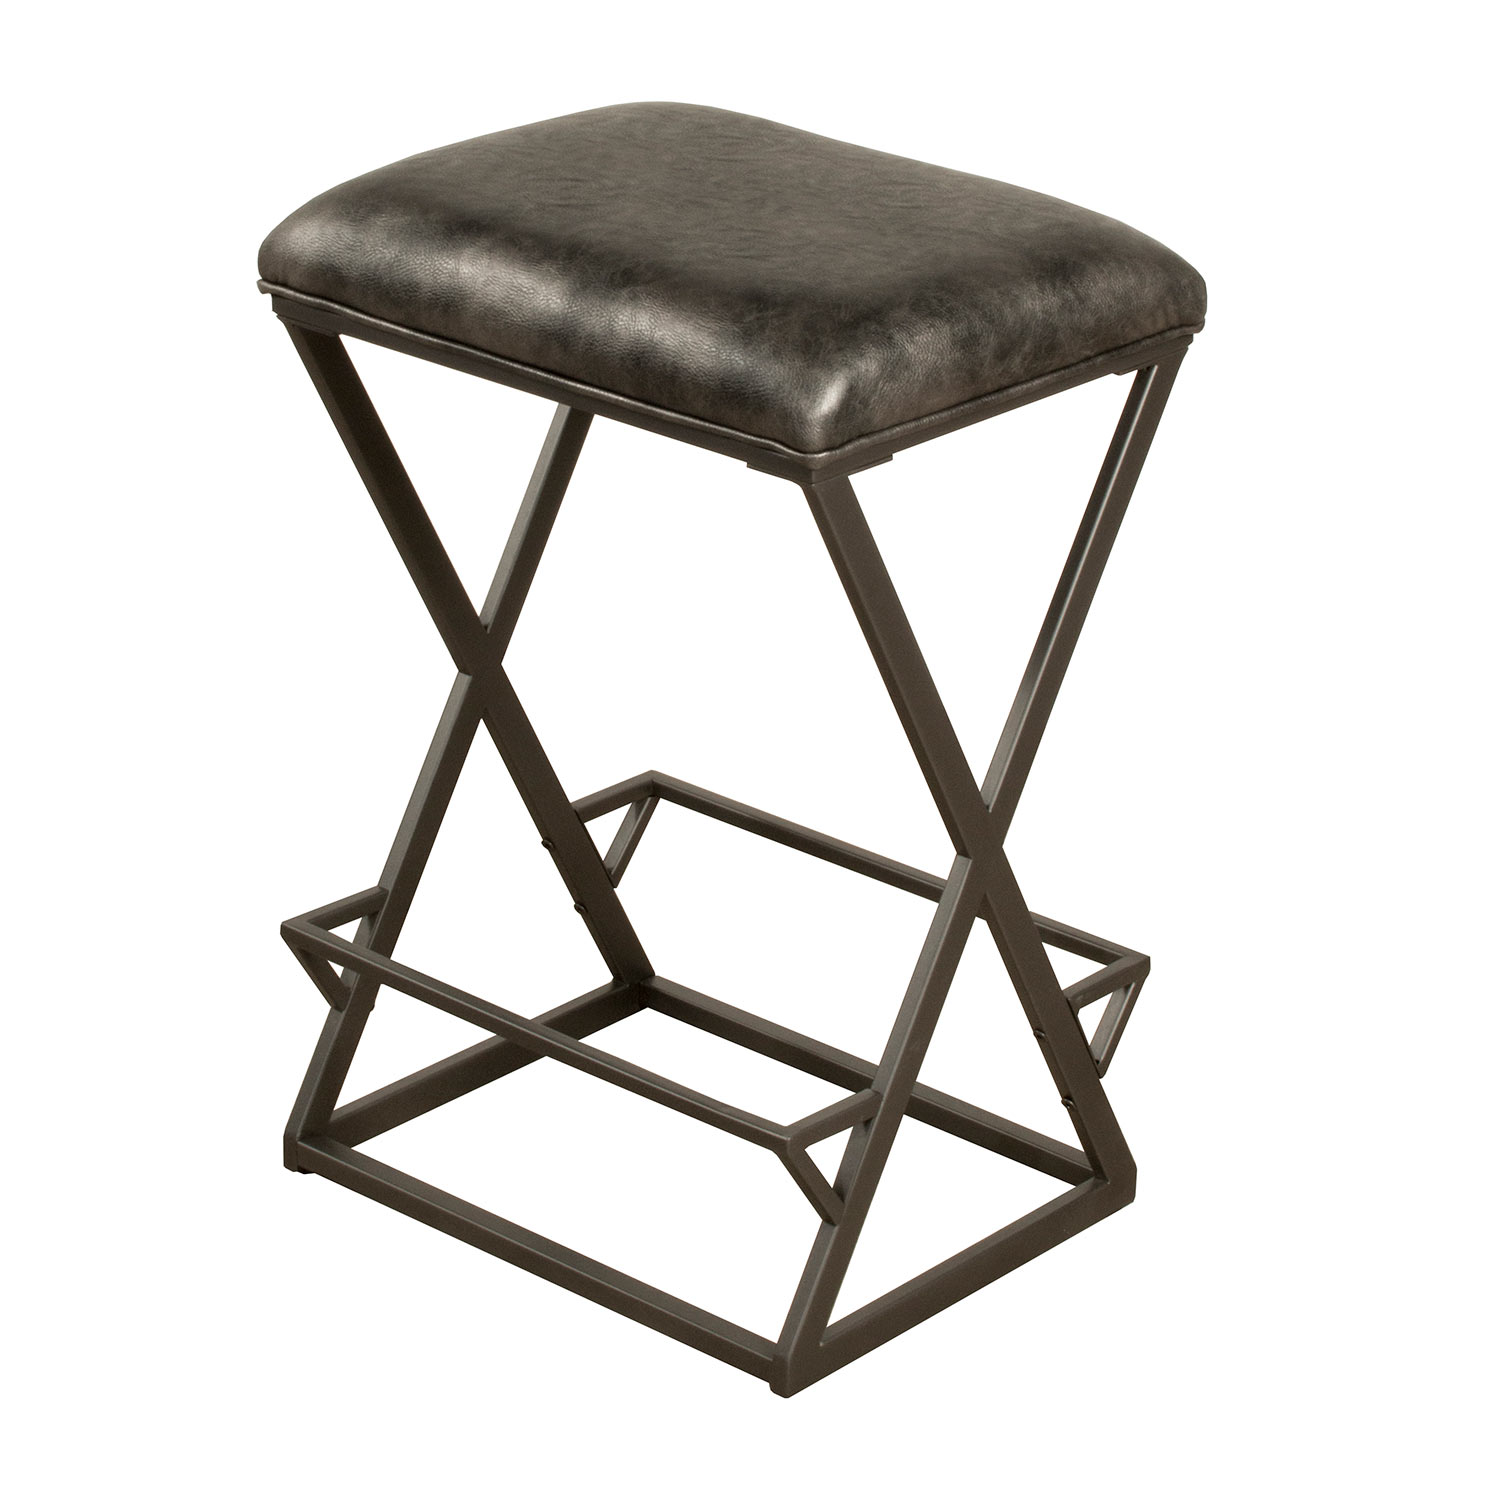 Hillsdale Kenwell Backless Non-Swivel Counter Stool - Charcoal